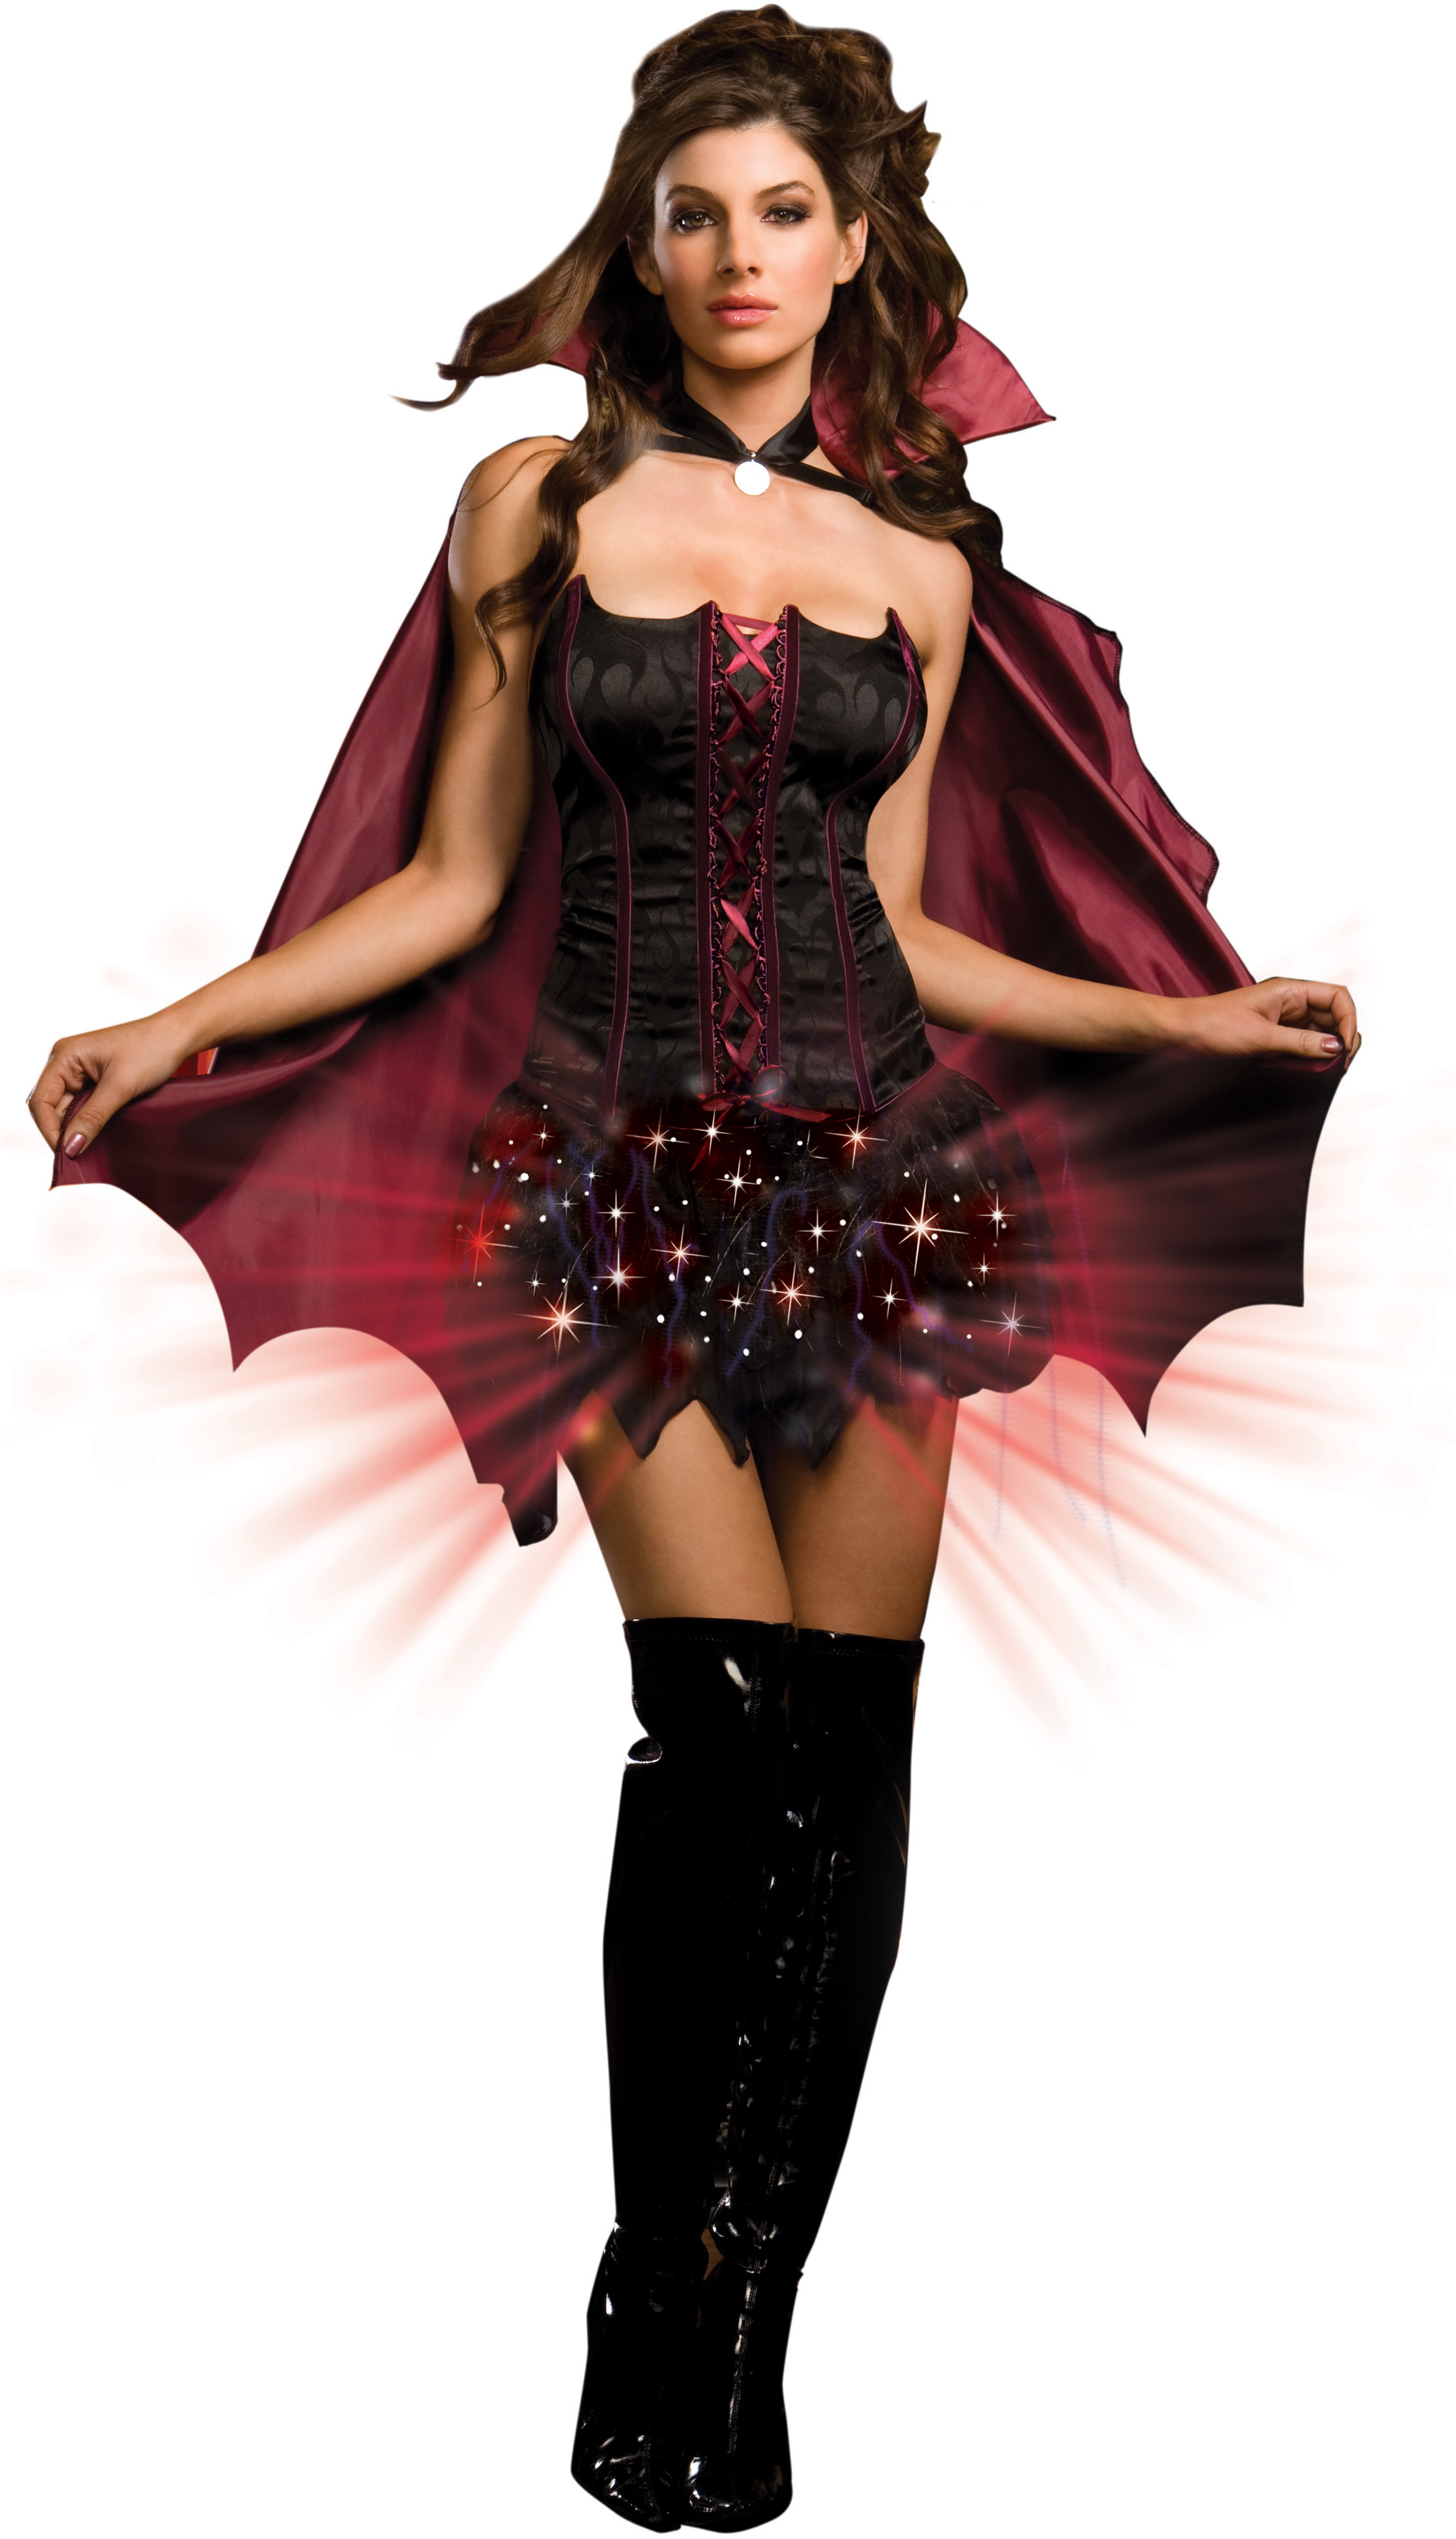 Adult Female Halloween Costumes on You D Better Get Your Teeth Into This Sexy Vampire Costume While You